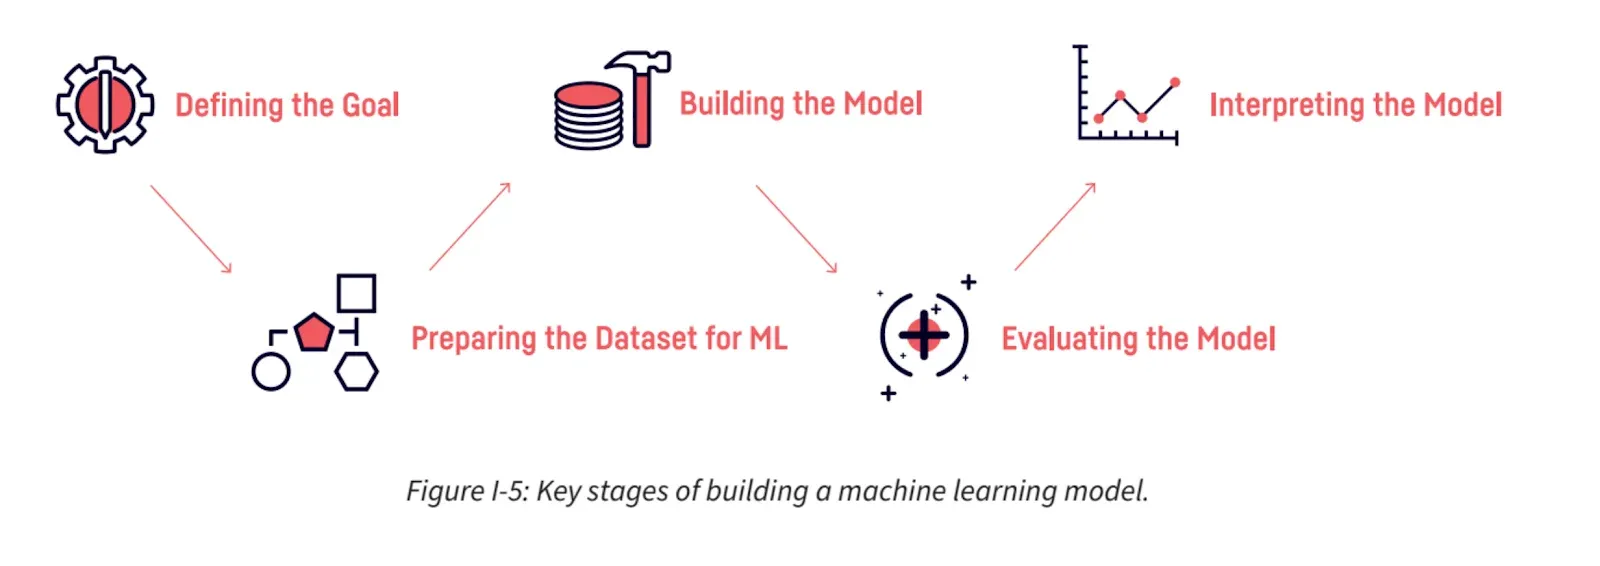 Steps in Building a Machine Learning Model